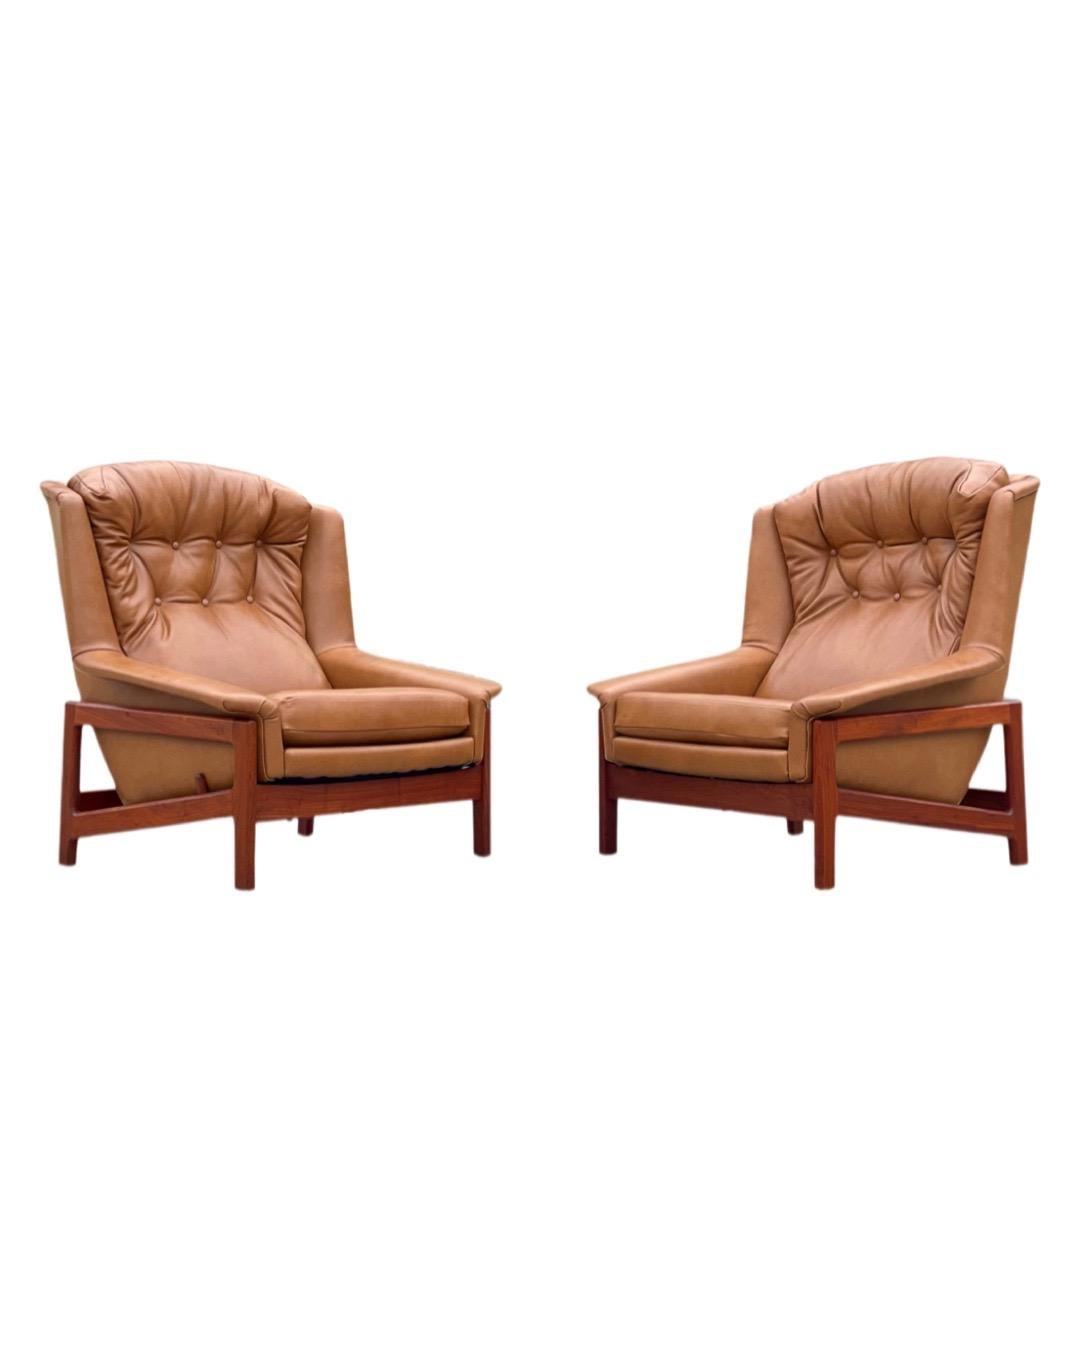 Unique on the market - rare pair of oversized rocking and reclining lounge chairs and ottoman by Folke Ohlsson for DUX. Built in Sweden, circa 1968. These were the top of the line model that DUX offered - each chair rocks smoothly within its base